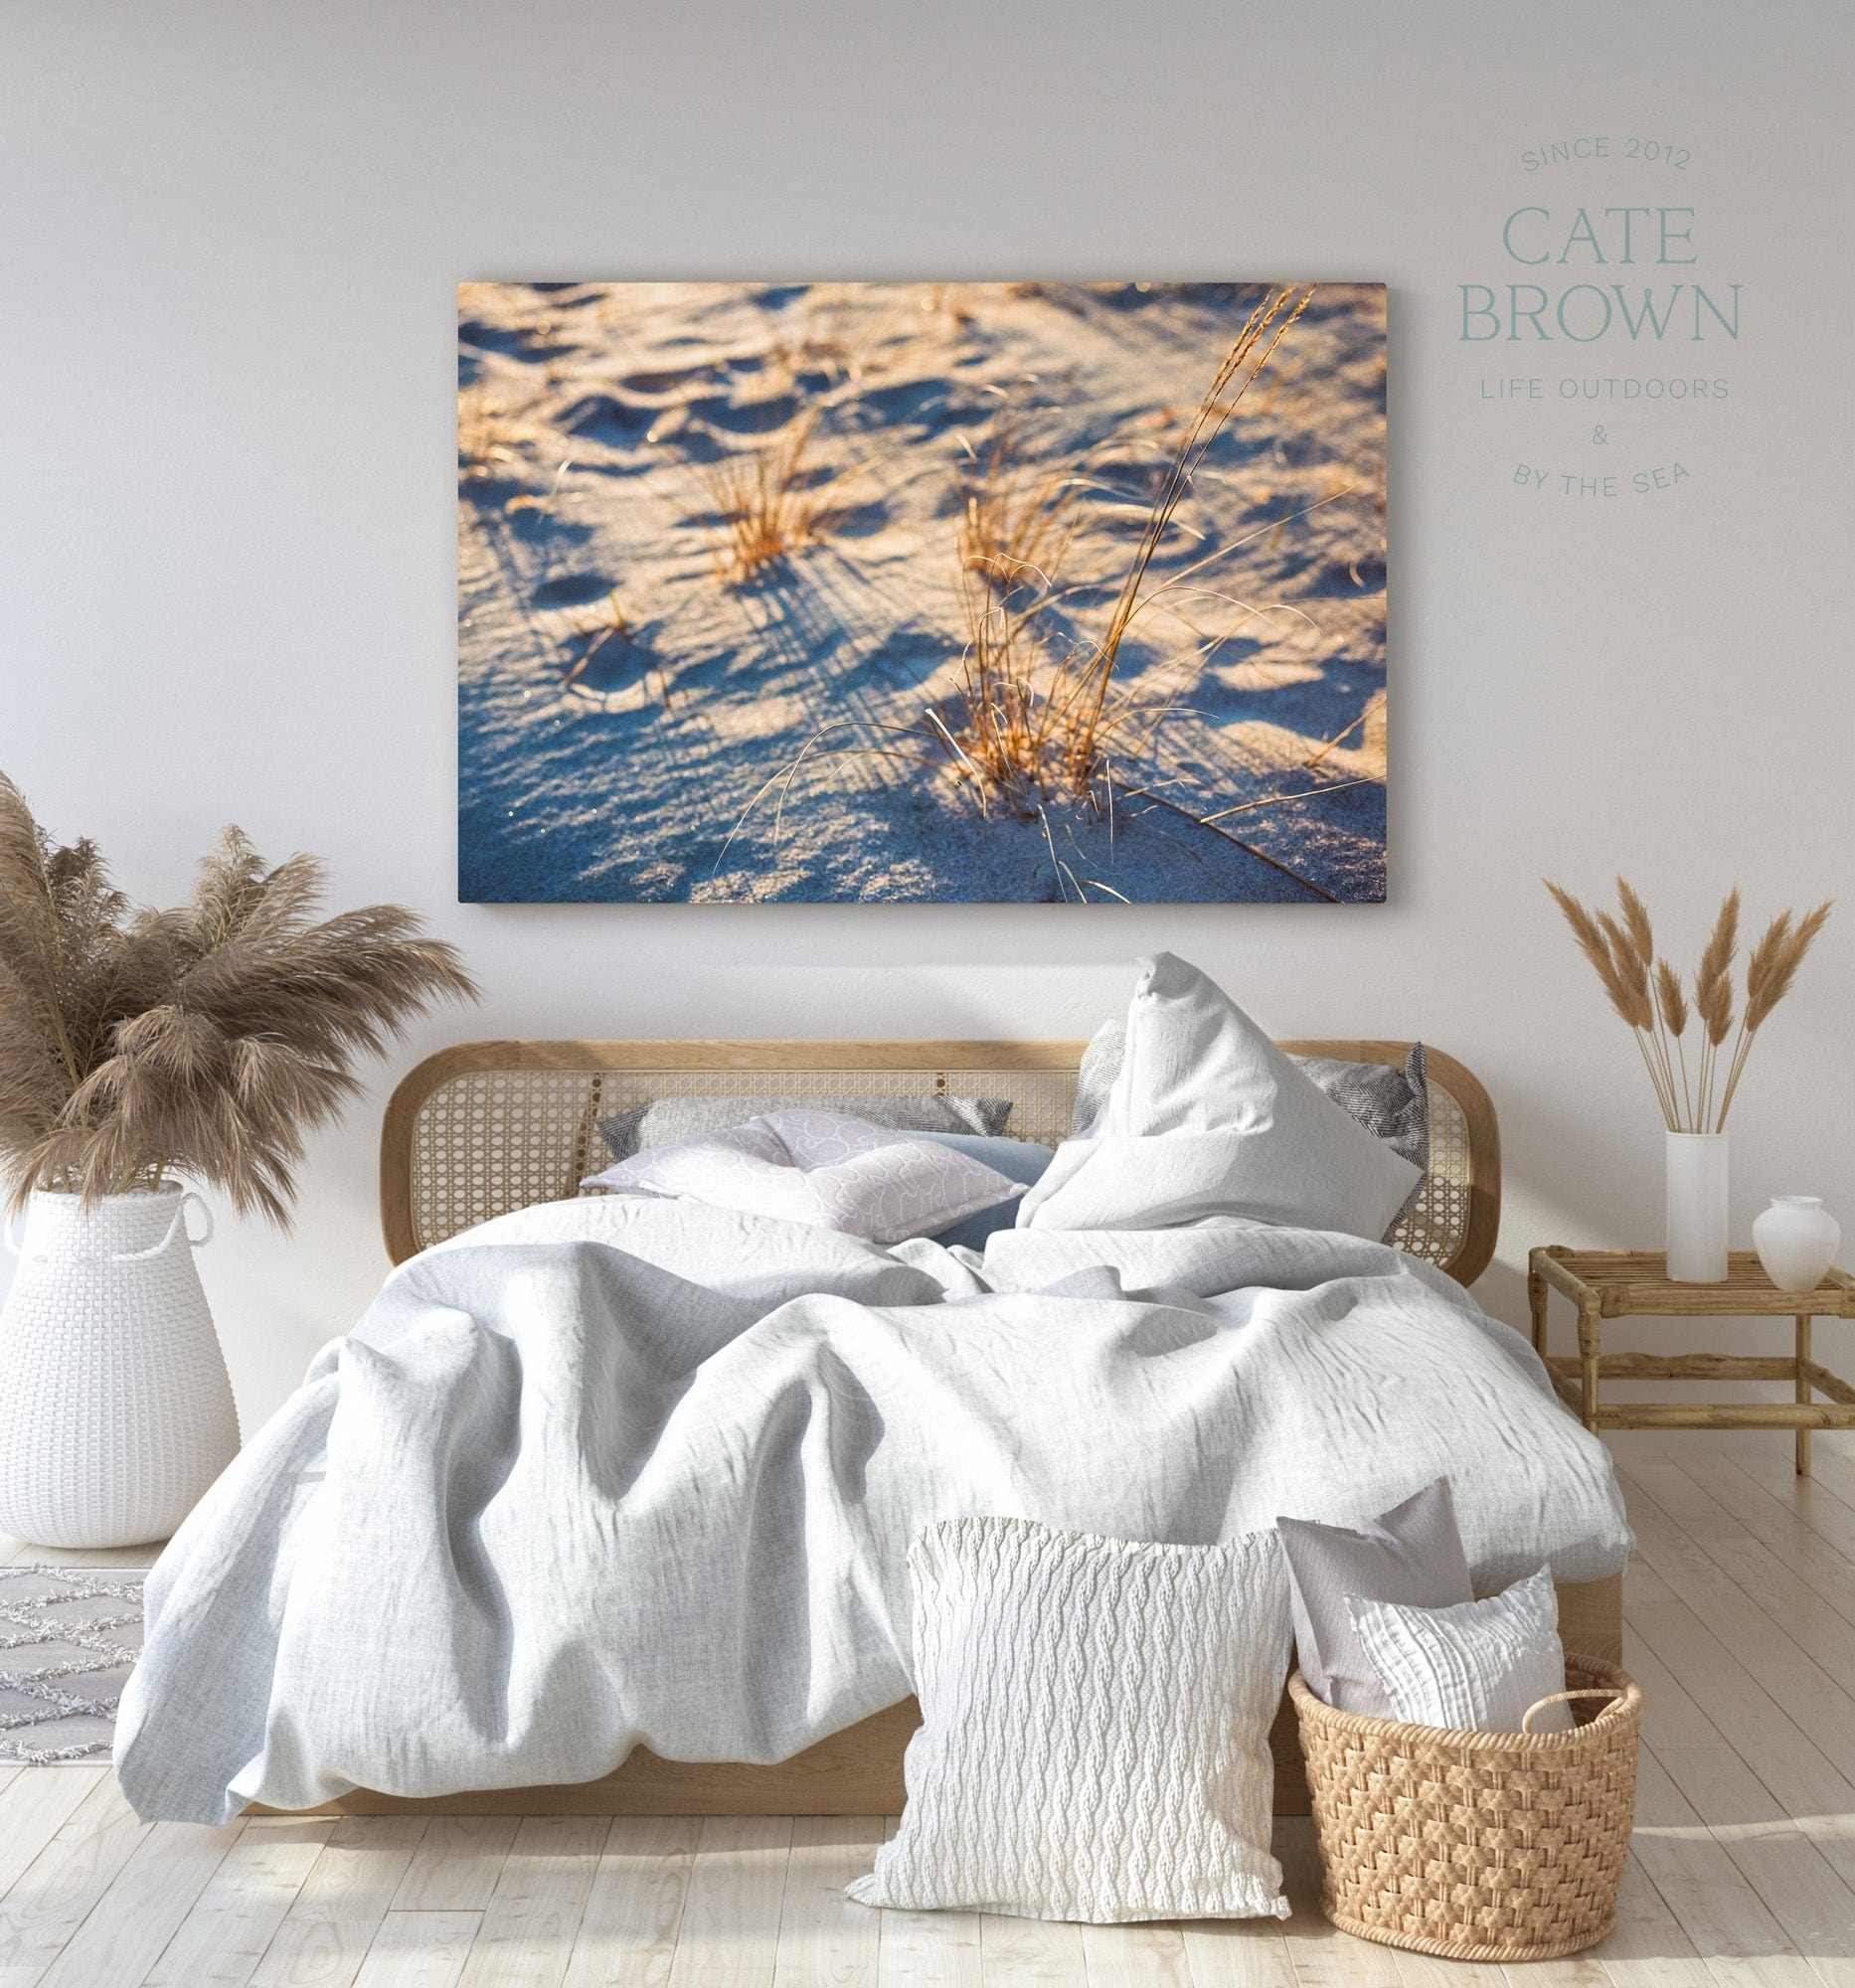 Cate Brown Photo Canvas / 16"x24" / None (Print Only) Beach Grass in Gold #2  //  Film Photography Made to Order Ocean Fine Art